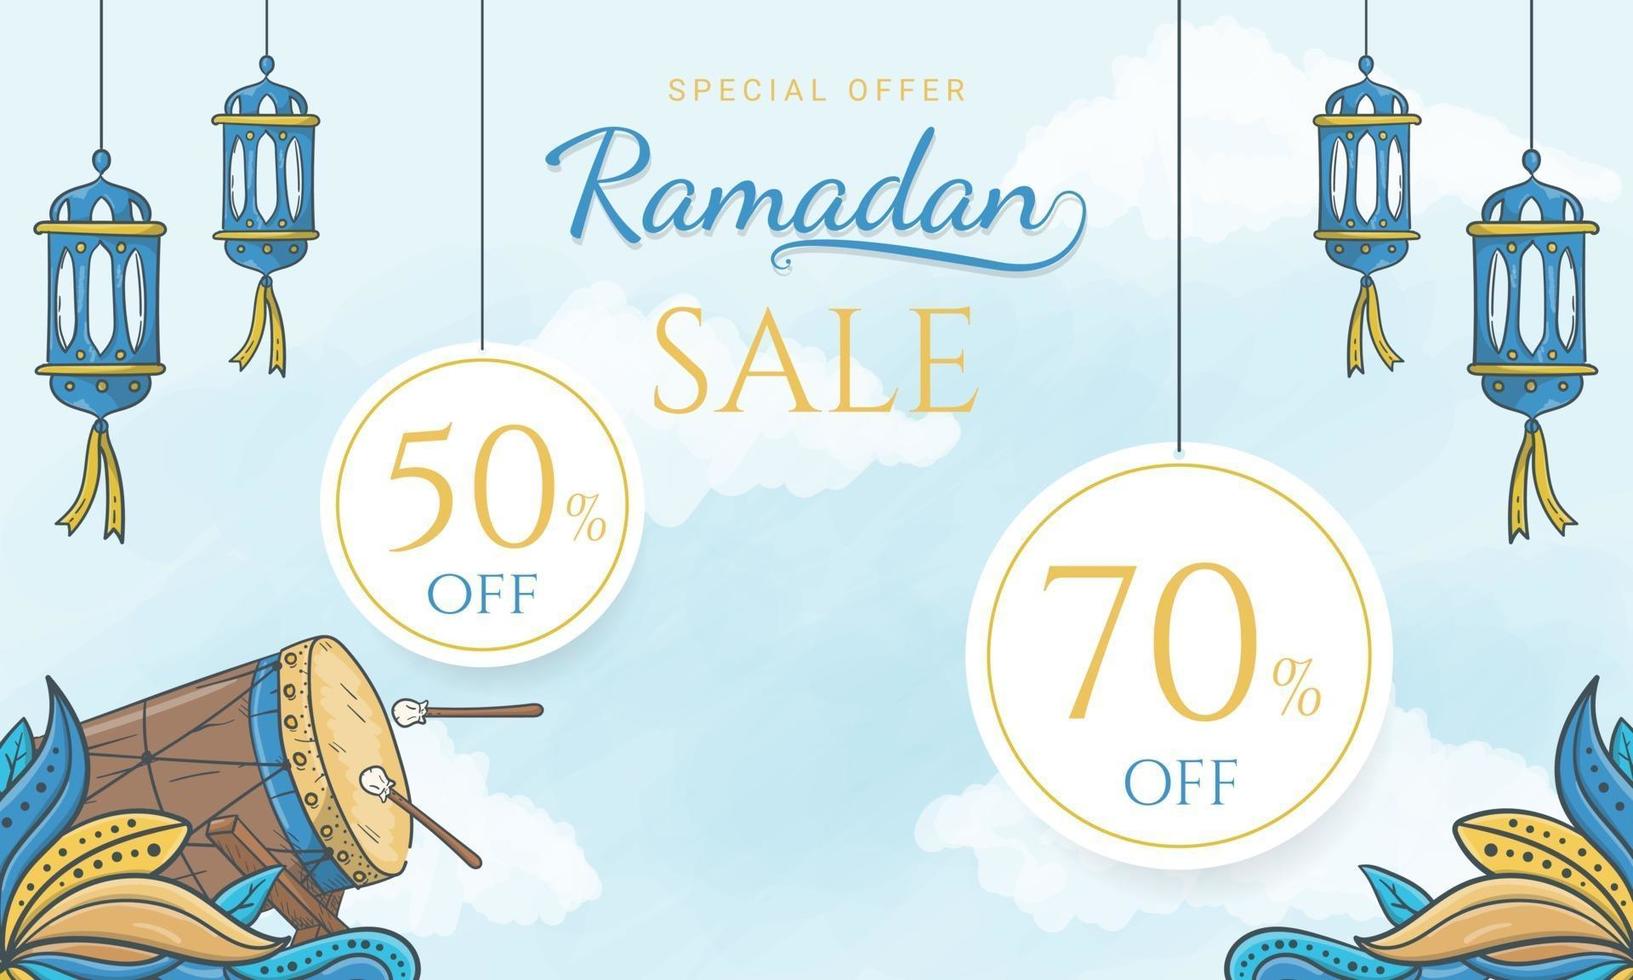 Hand drawn special offer ramadan sale banner with islamic ornament vector